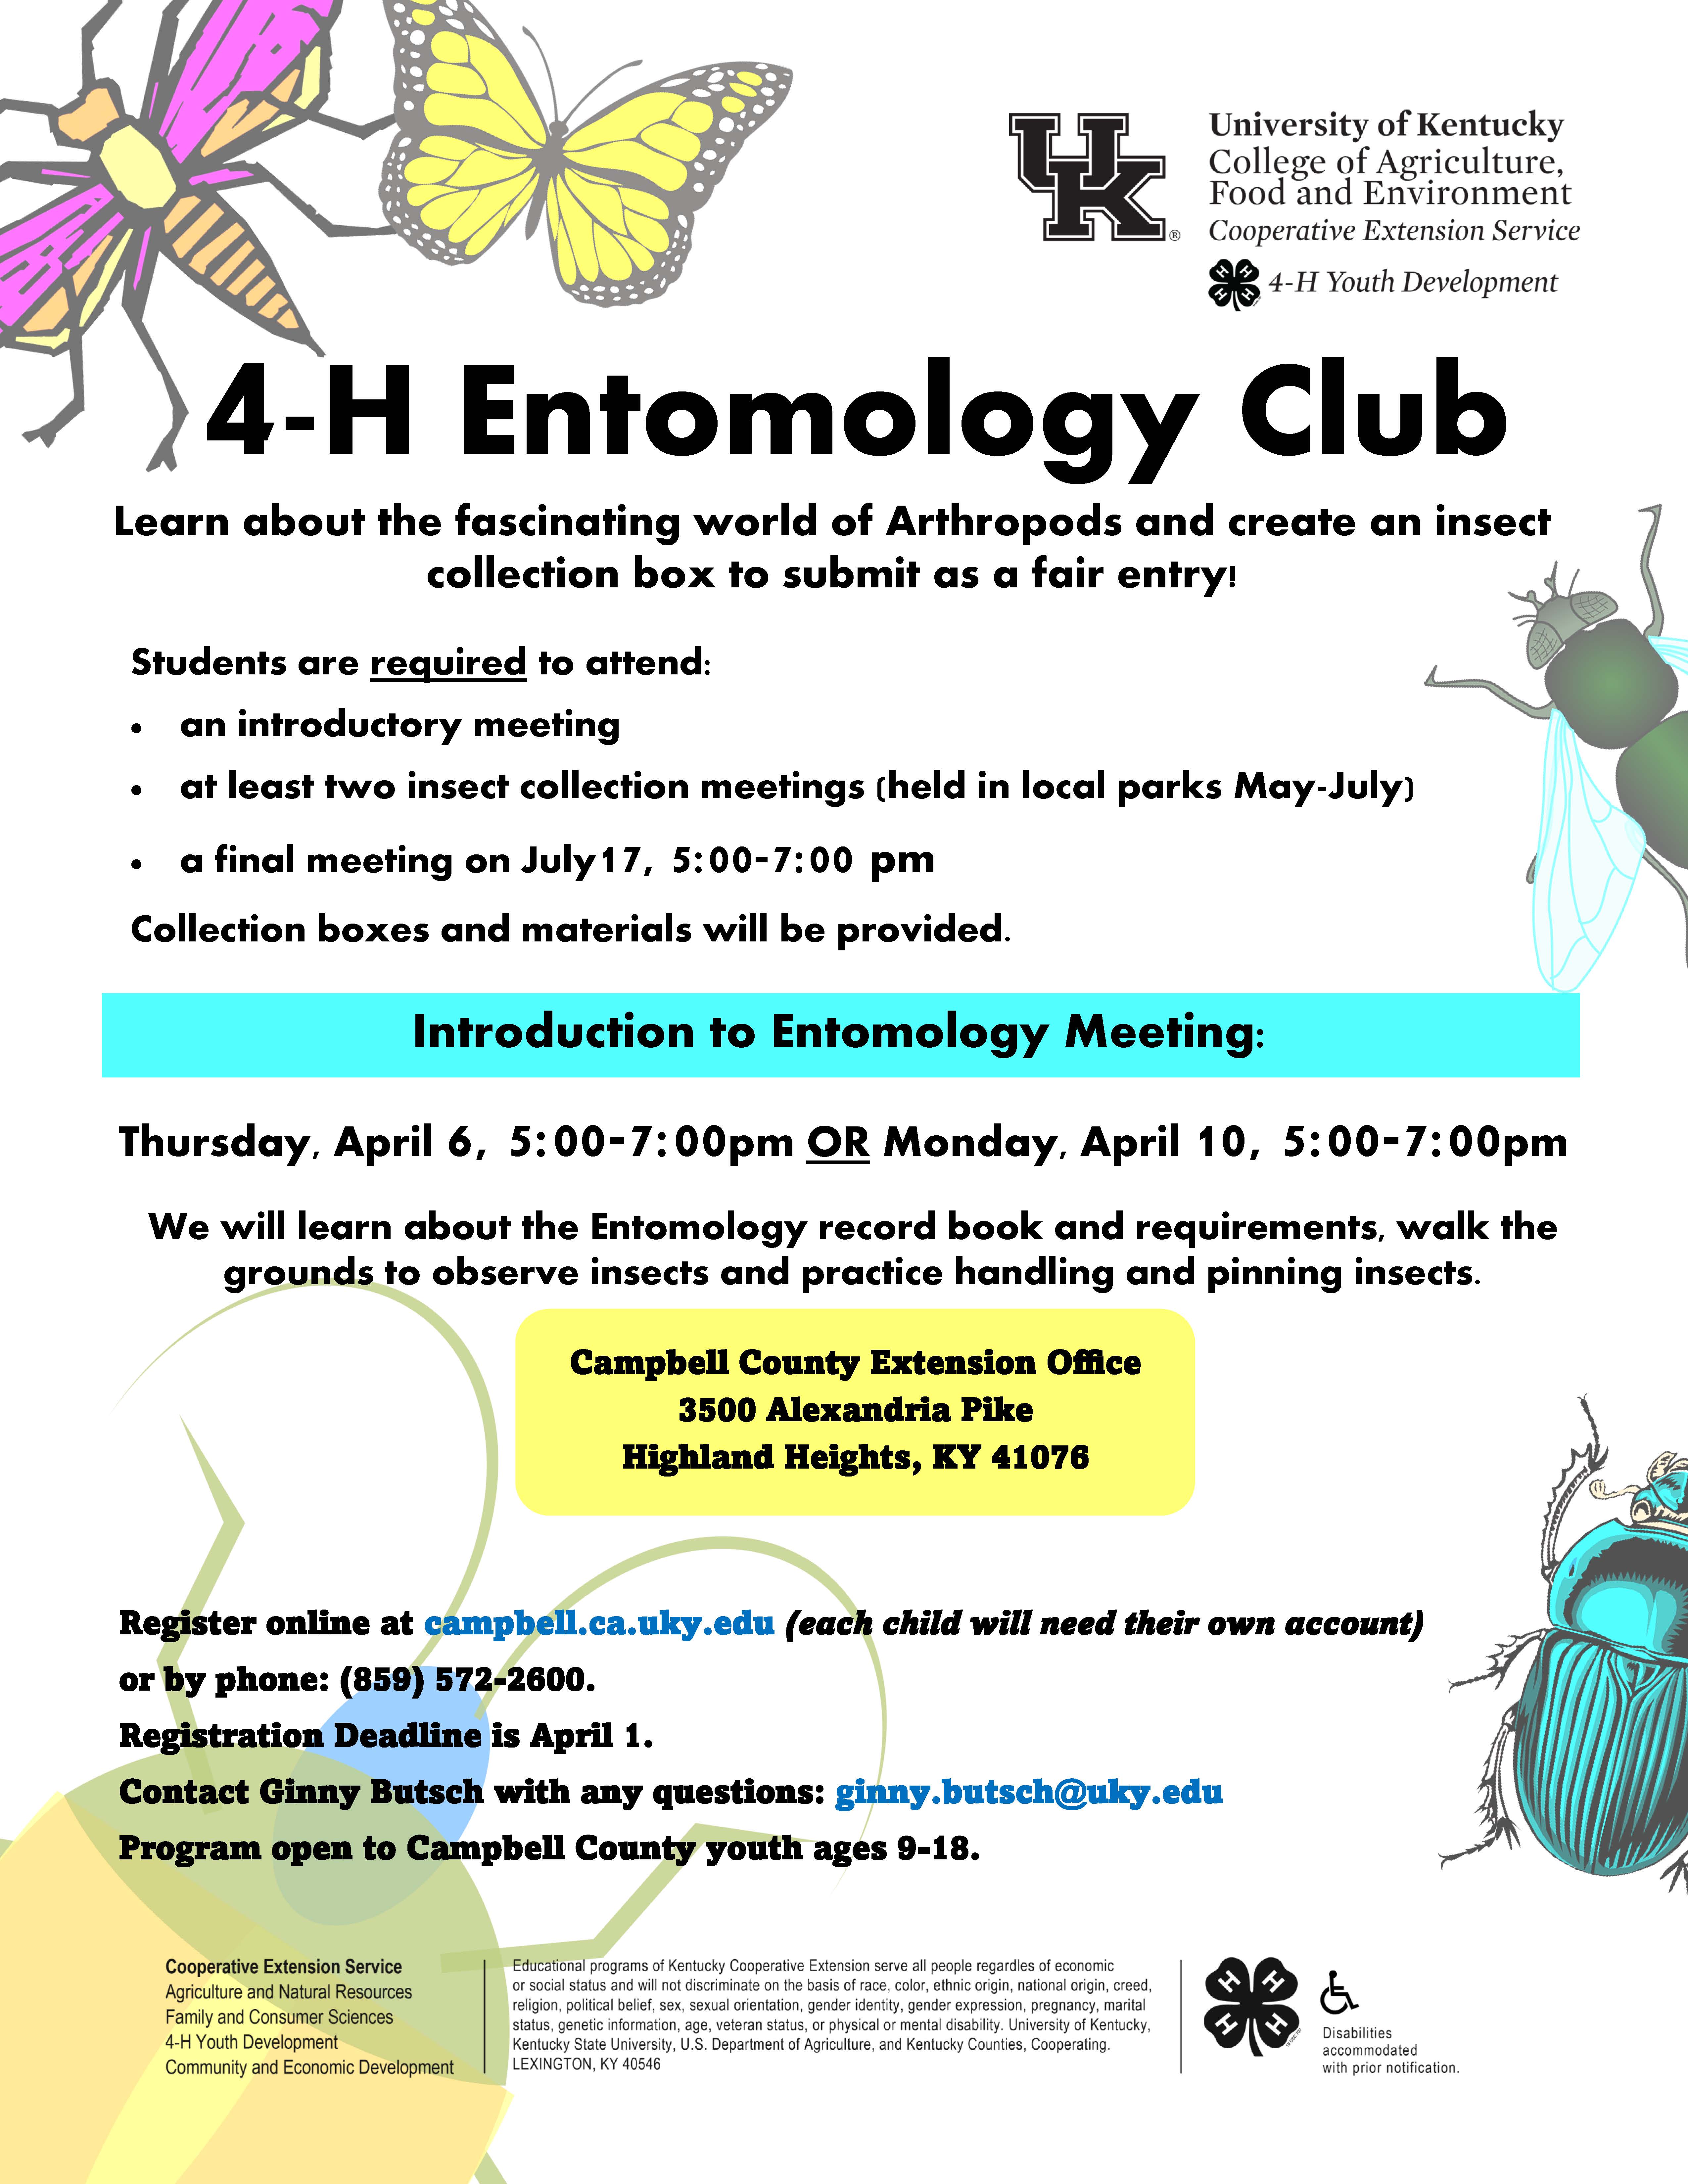 4-H Entomology Club: Learn about the fascinating world of Arthopods and create an insect collection box to submit as a fair entry! April 6 OR April 10, 5:00-7:00pm at the Campbell County Cooperative Extension Office. 3500 Alexandria Pike Highland Heights, KY 41076. Call 859-572-2600 to register.